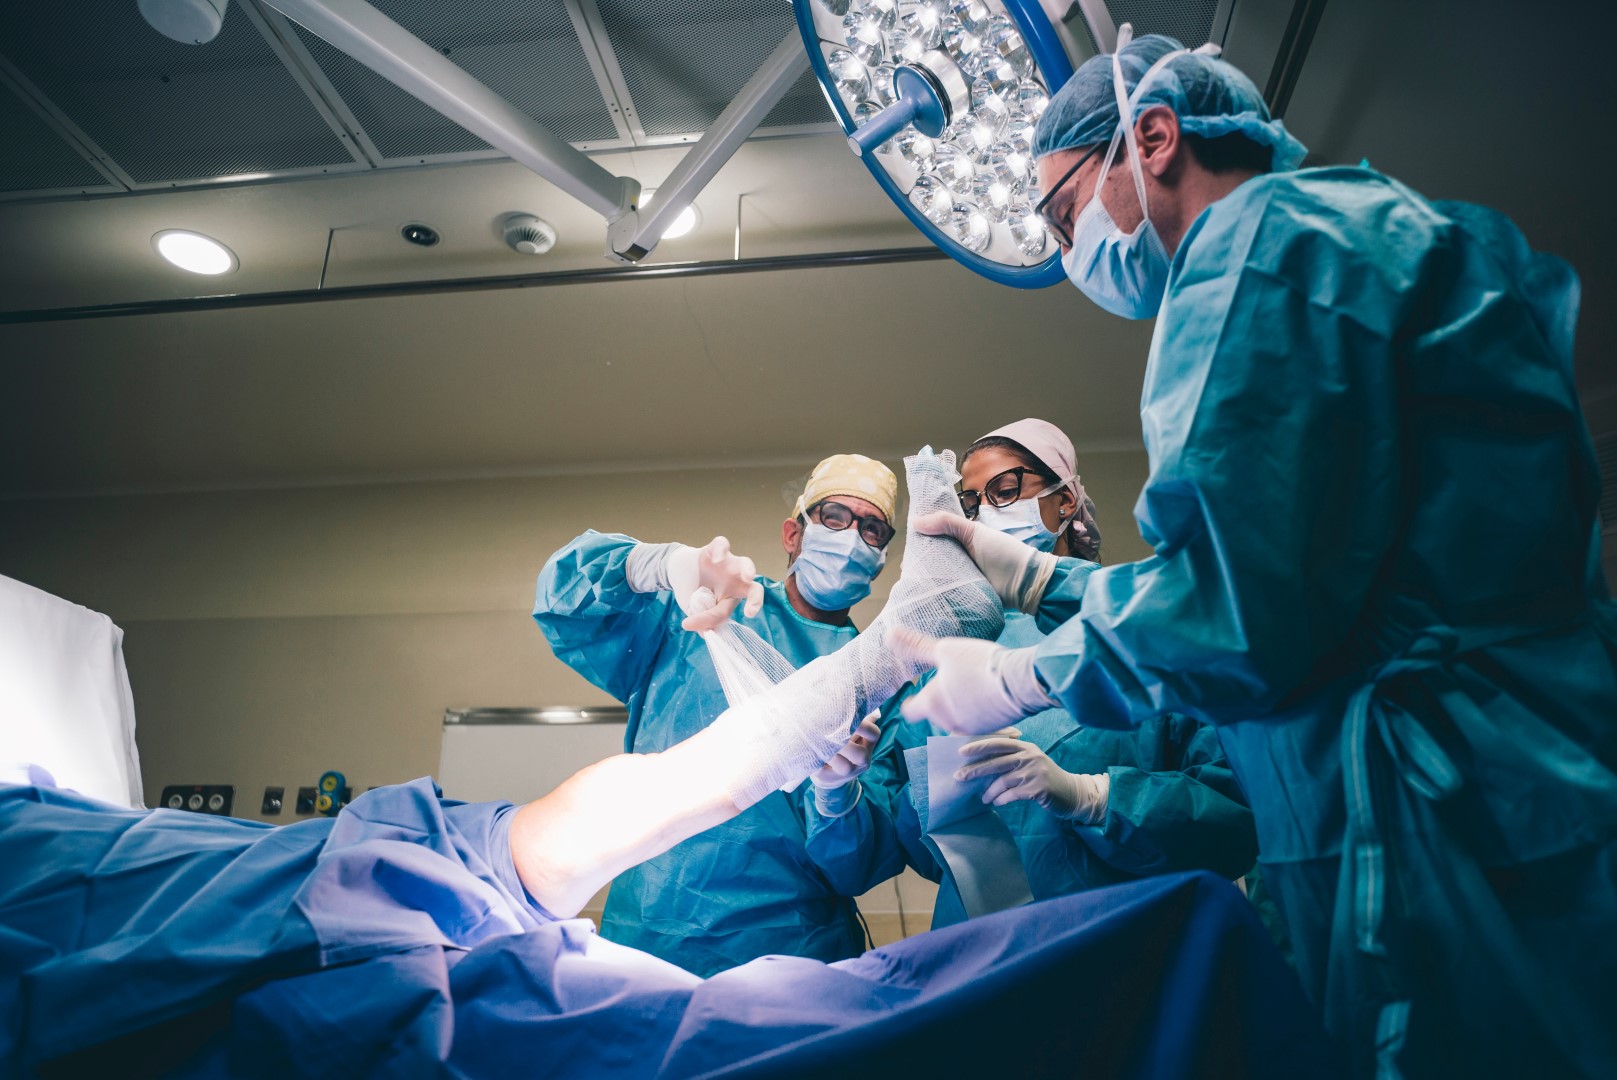 A surgical team wearing blue personal protective equipment (PPE) performs knee surgery at an orthopedic surgery hospital.